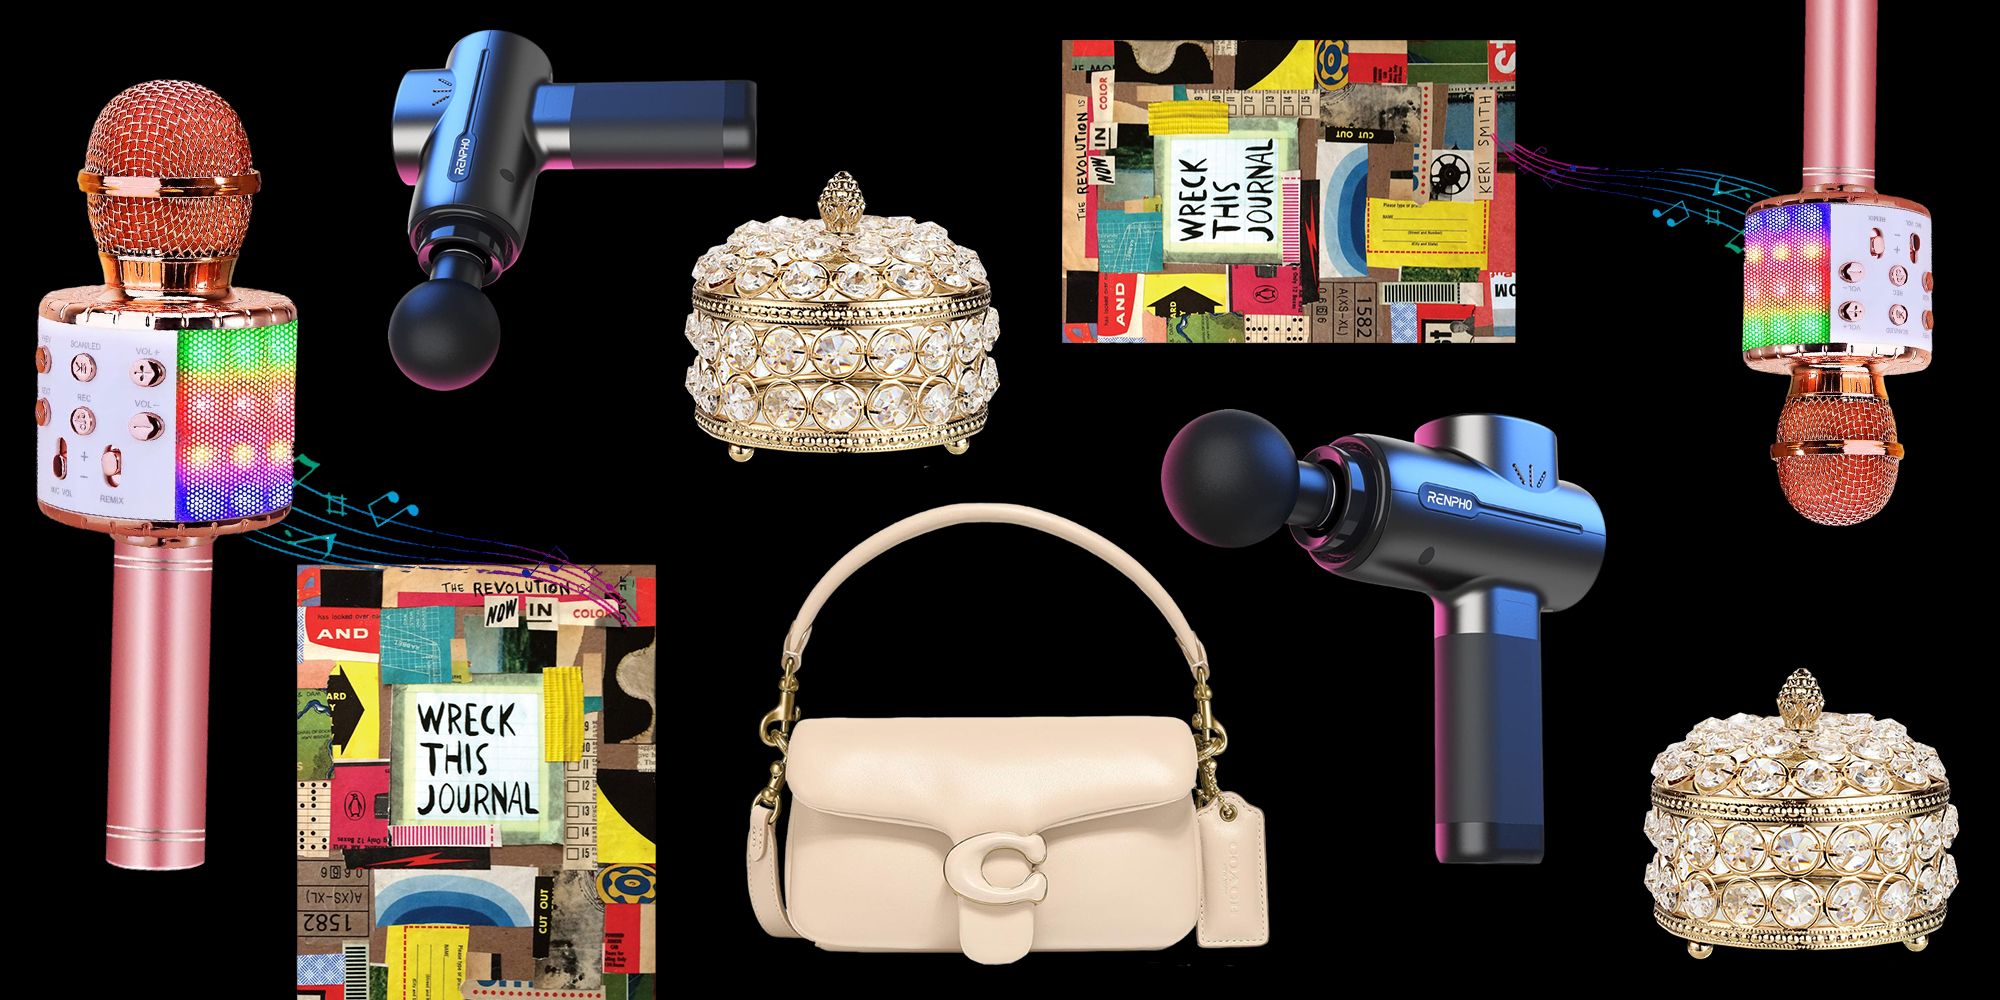 51+ Best Gifts For Business Women [ 2022 Top Picks]